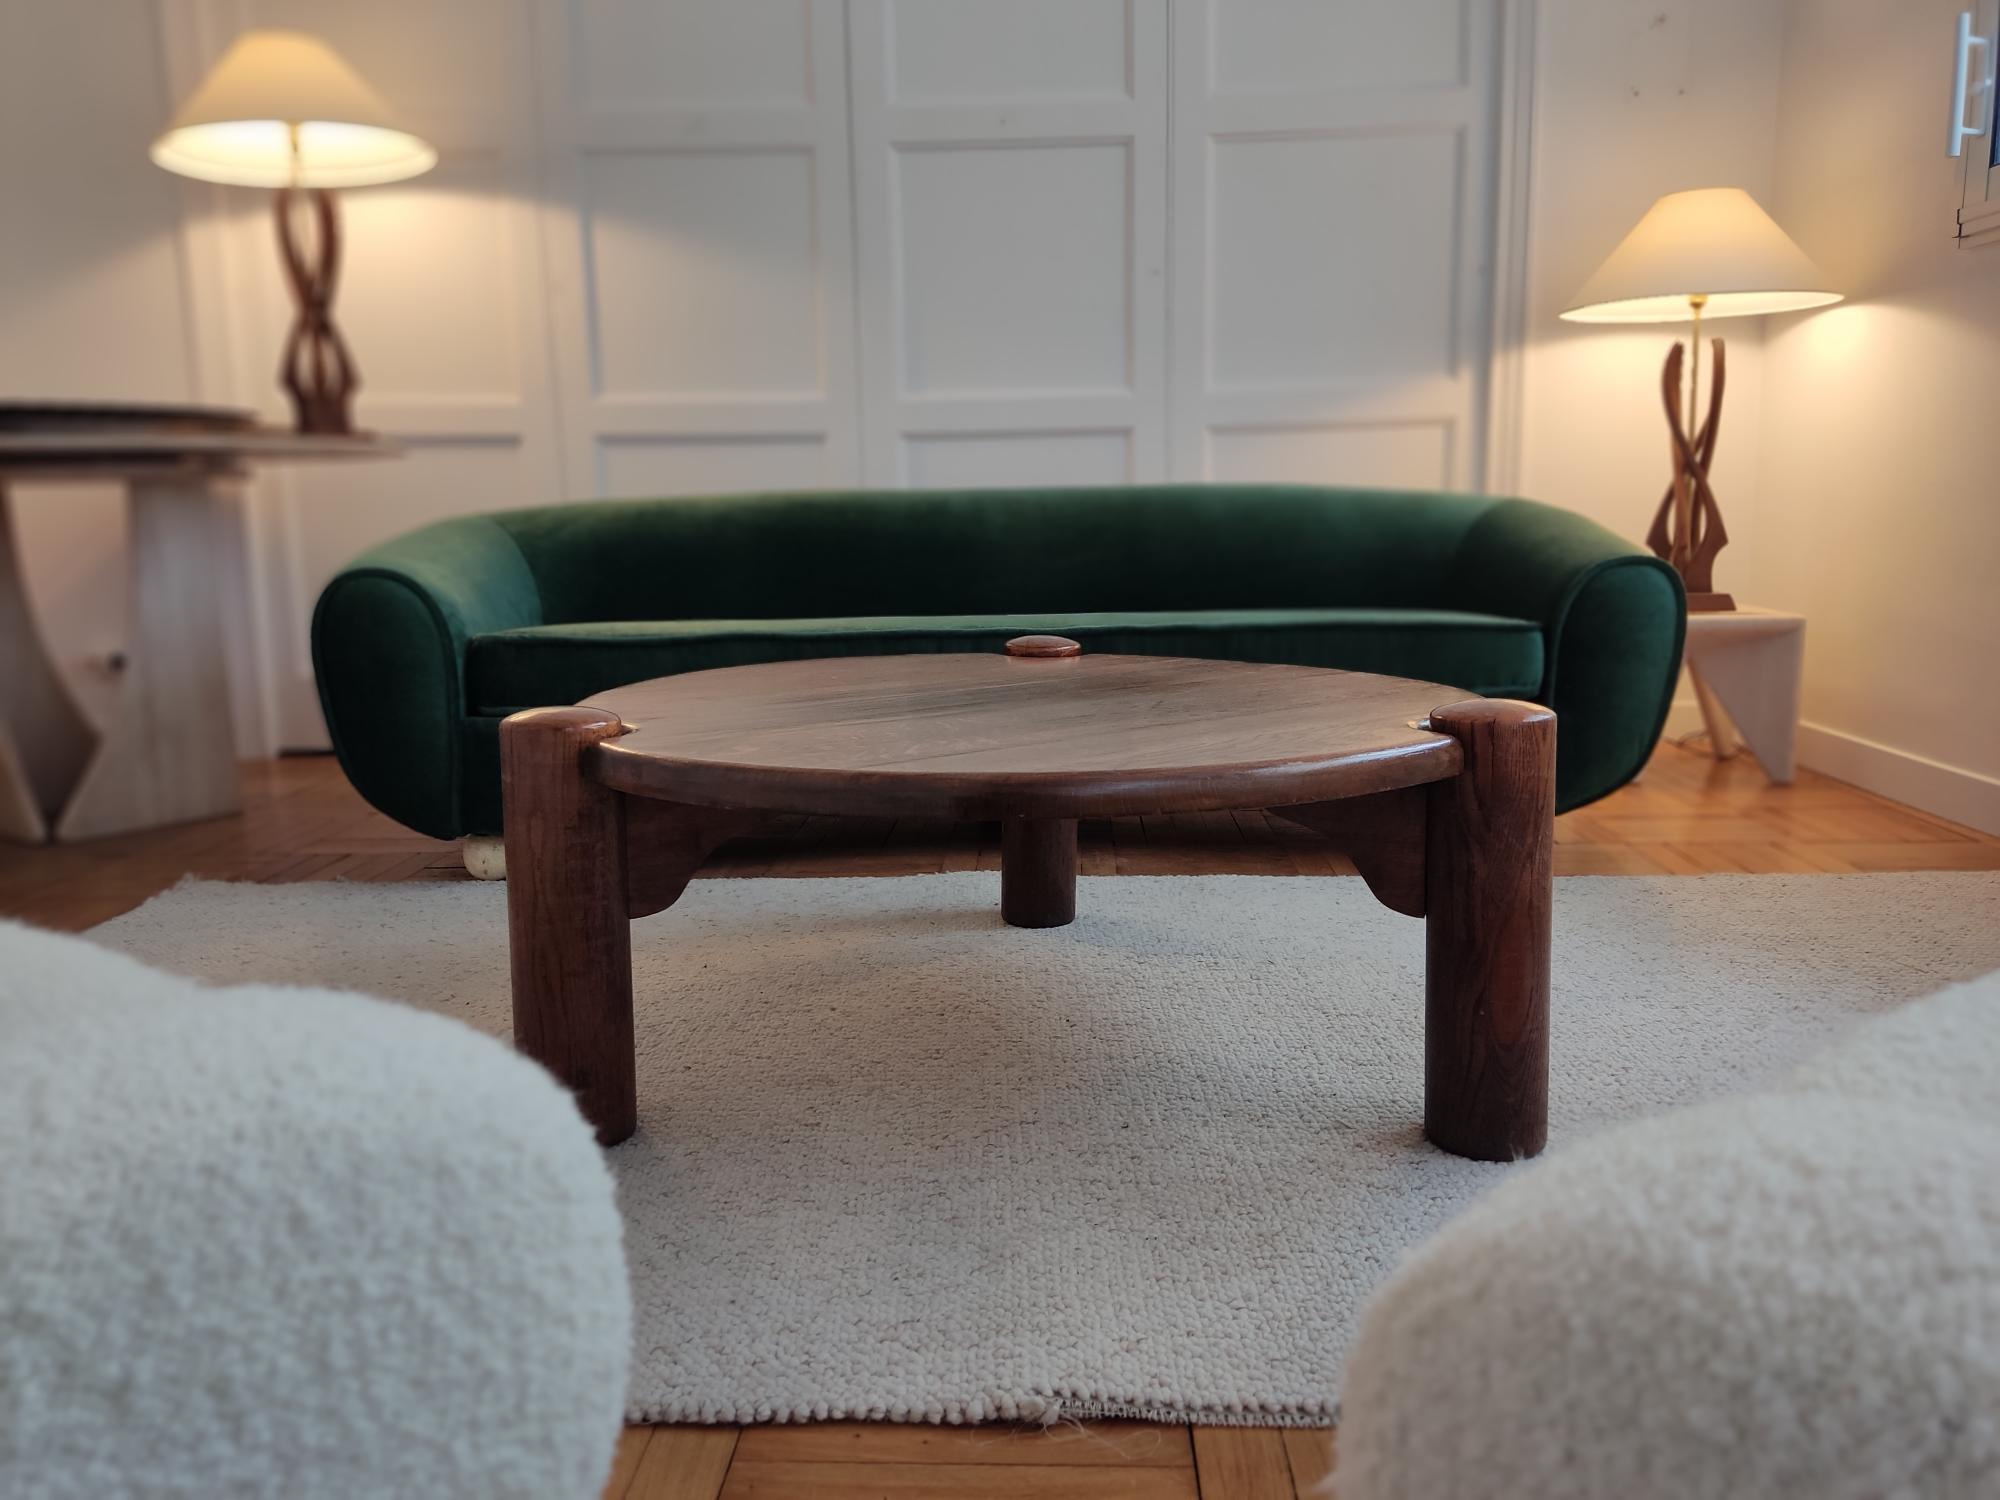 Tripod and circular oak coffee table from the 1960s.
The cylindrical legs fit the circular shape of the table from the outside. This coquetry as well as the beautiful proportions give a lot of style to this noble wood table.

